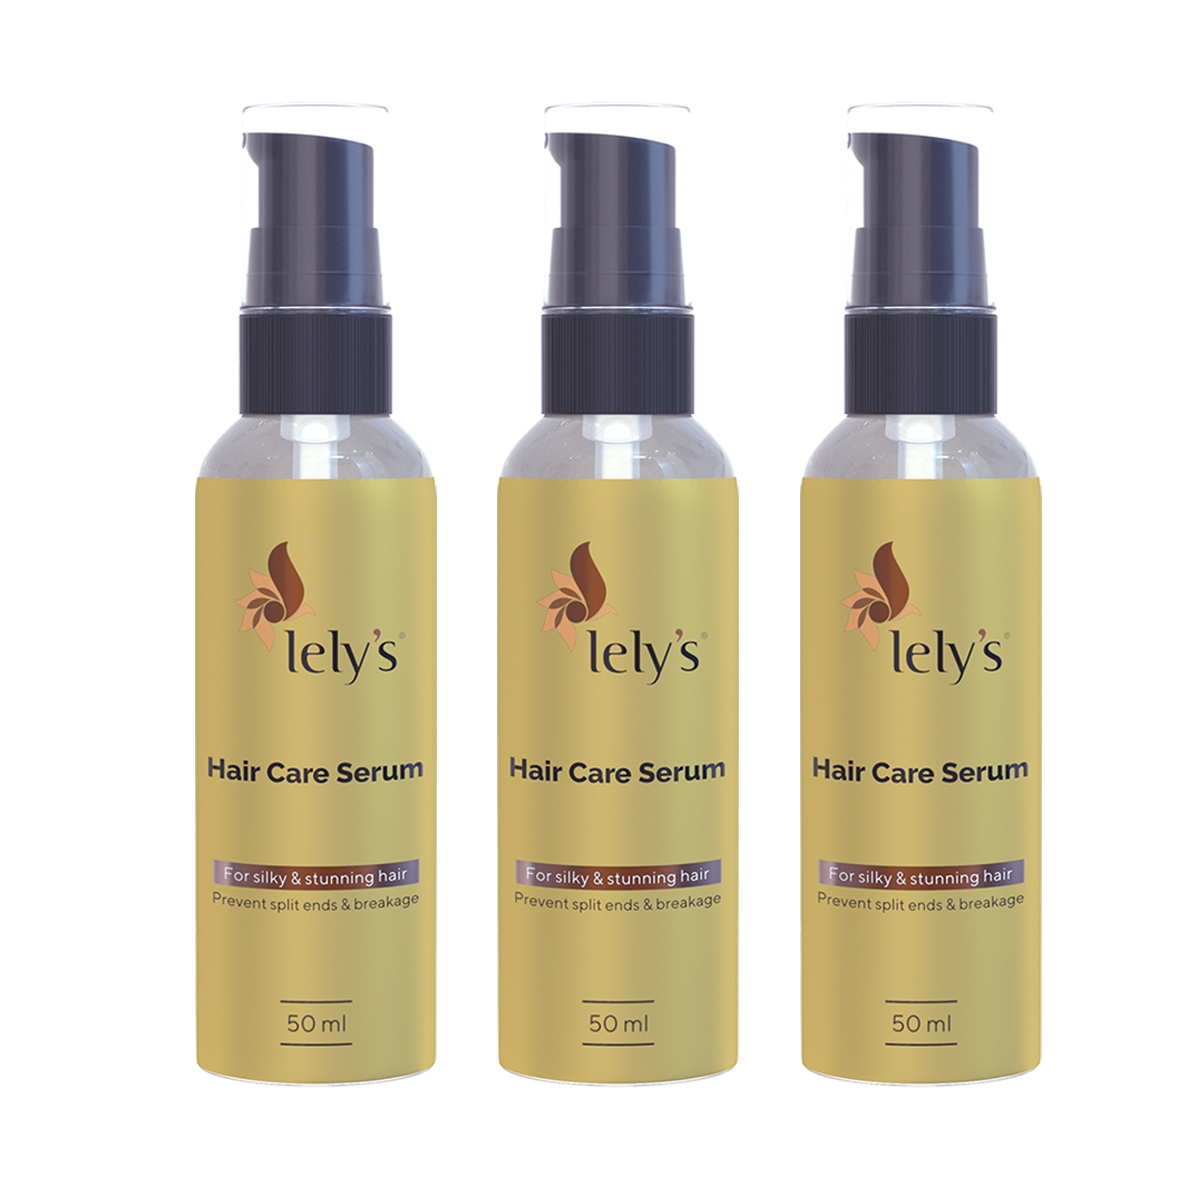 lely's | Lely’s Hair Care Serum - Non-Sticky, Gorgeous & Shiny Hair, Hydrates Dry Hair, Repairs Hair, All Hair Types, Frizz-Free Hair, For Men & Women - 50 Ml Pack of 3